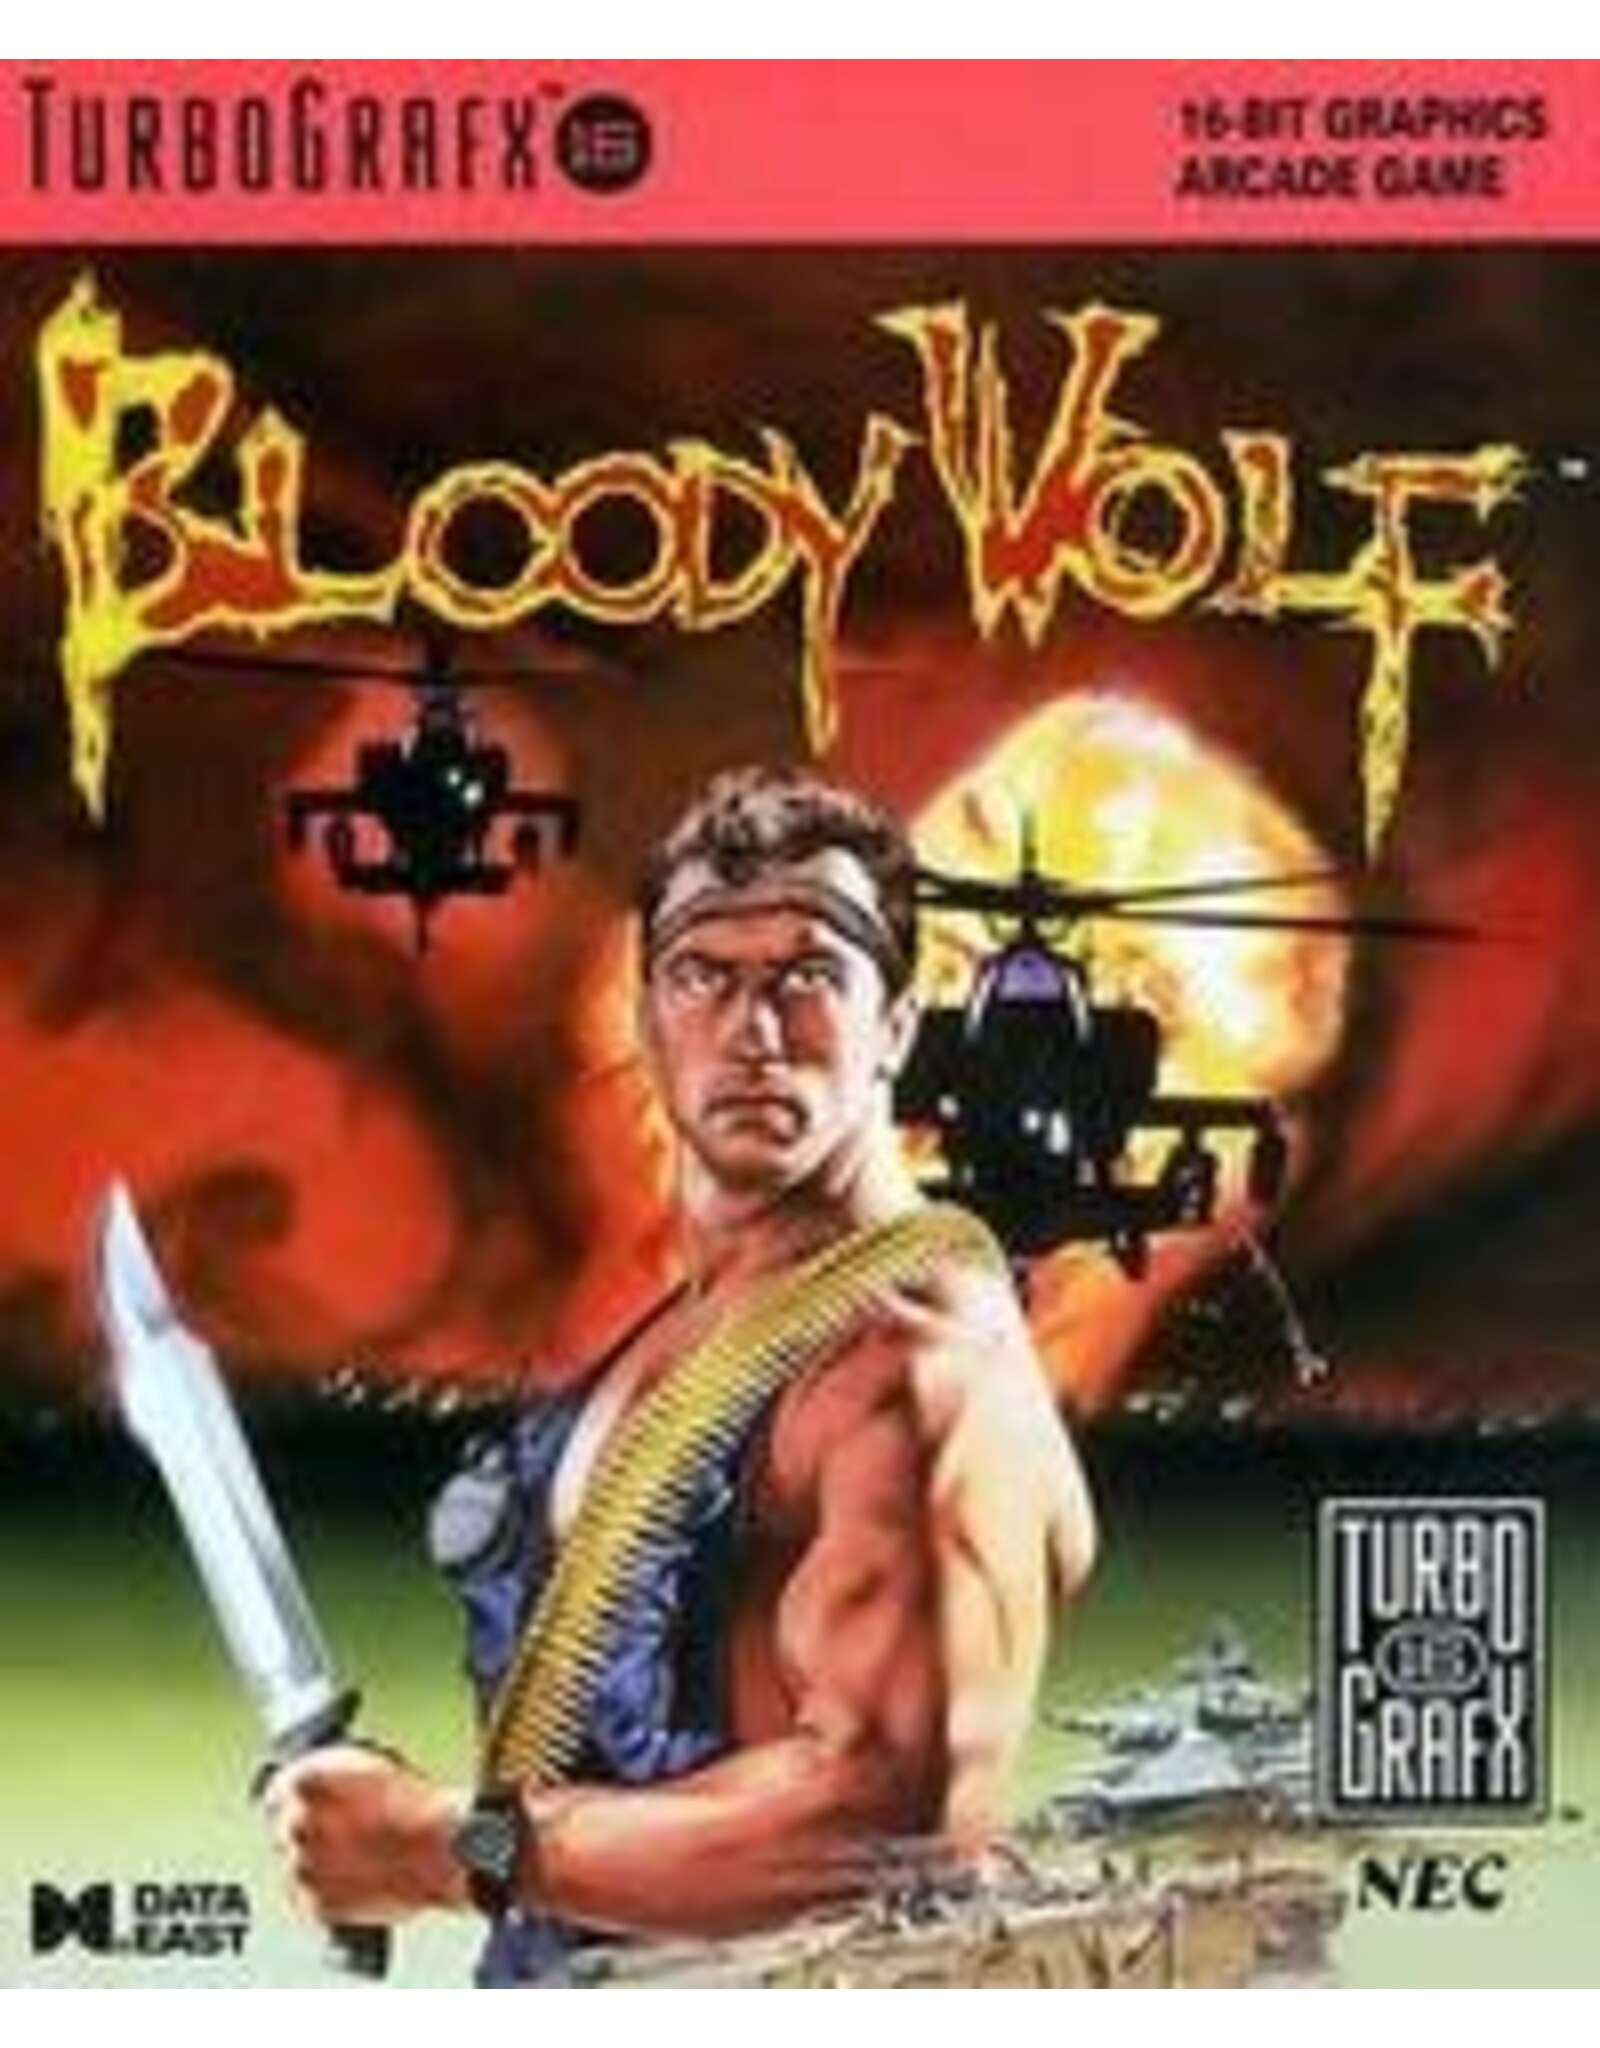 Turbografx 16 Bloody Wolf (Used, Cart Only, Cosmetic Damage)